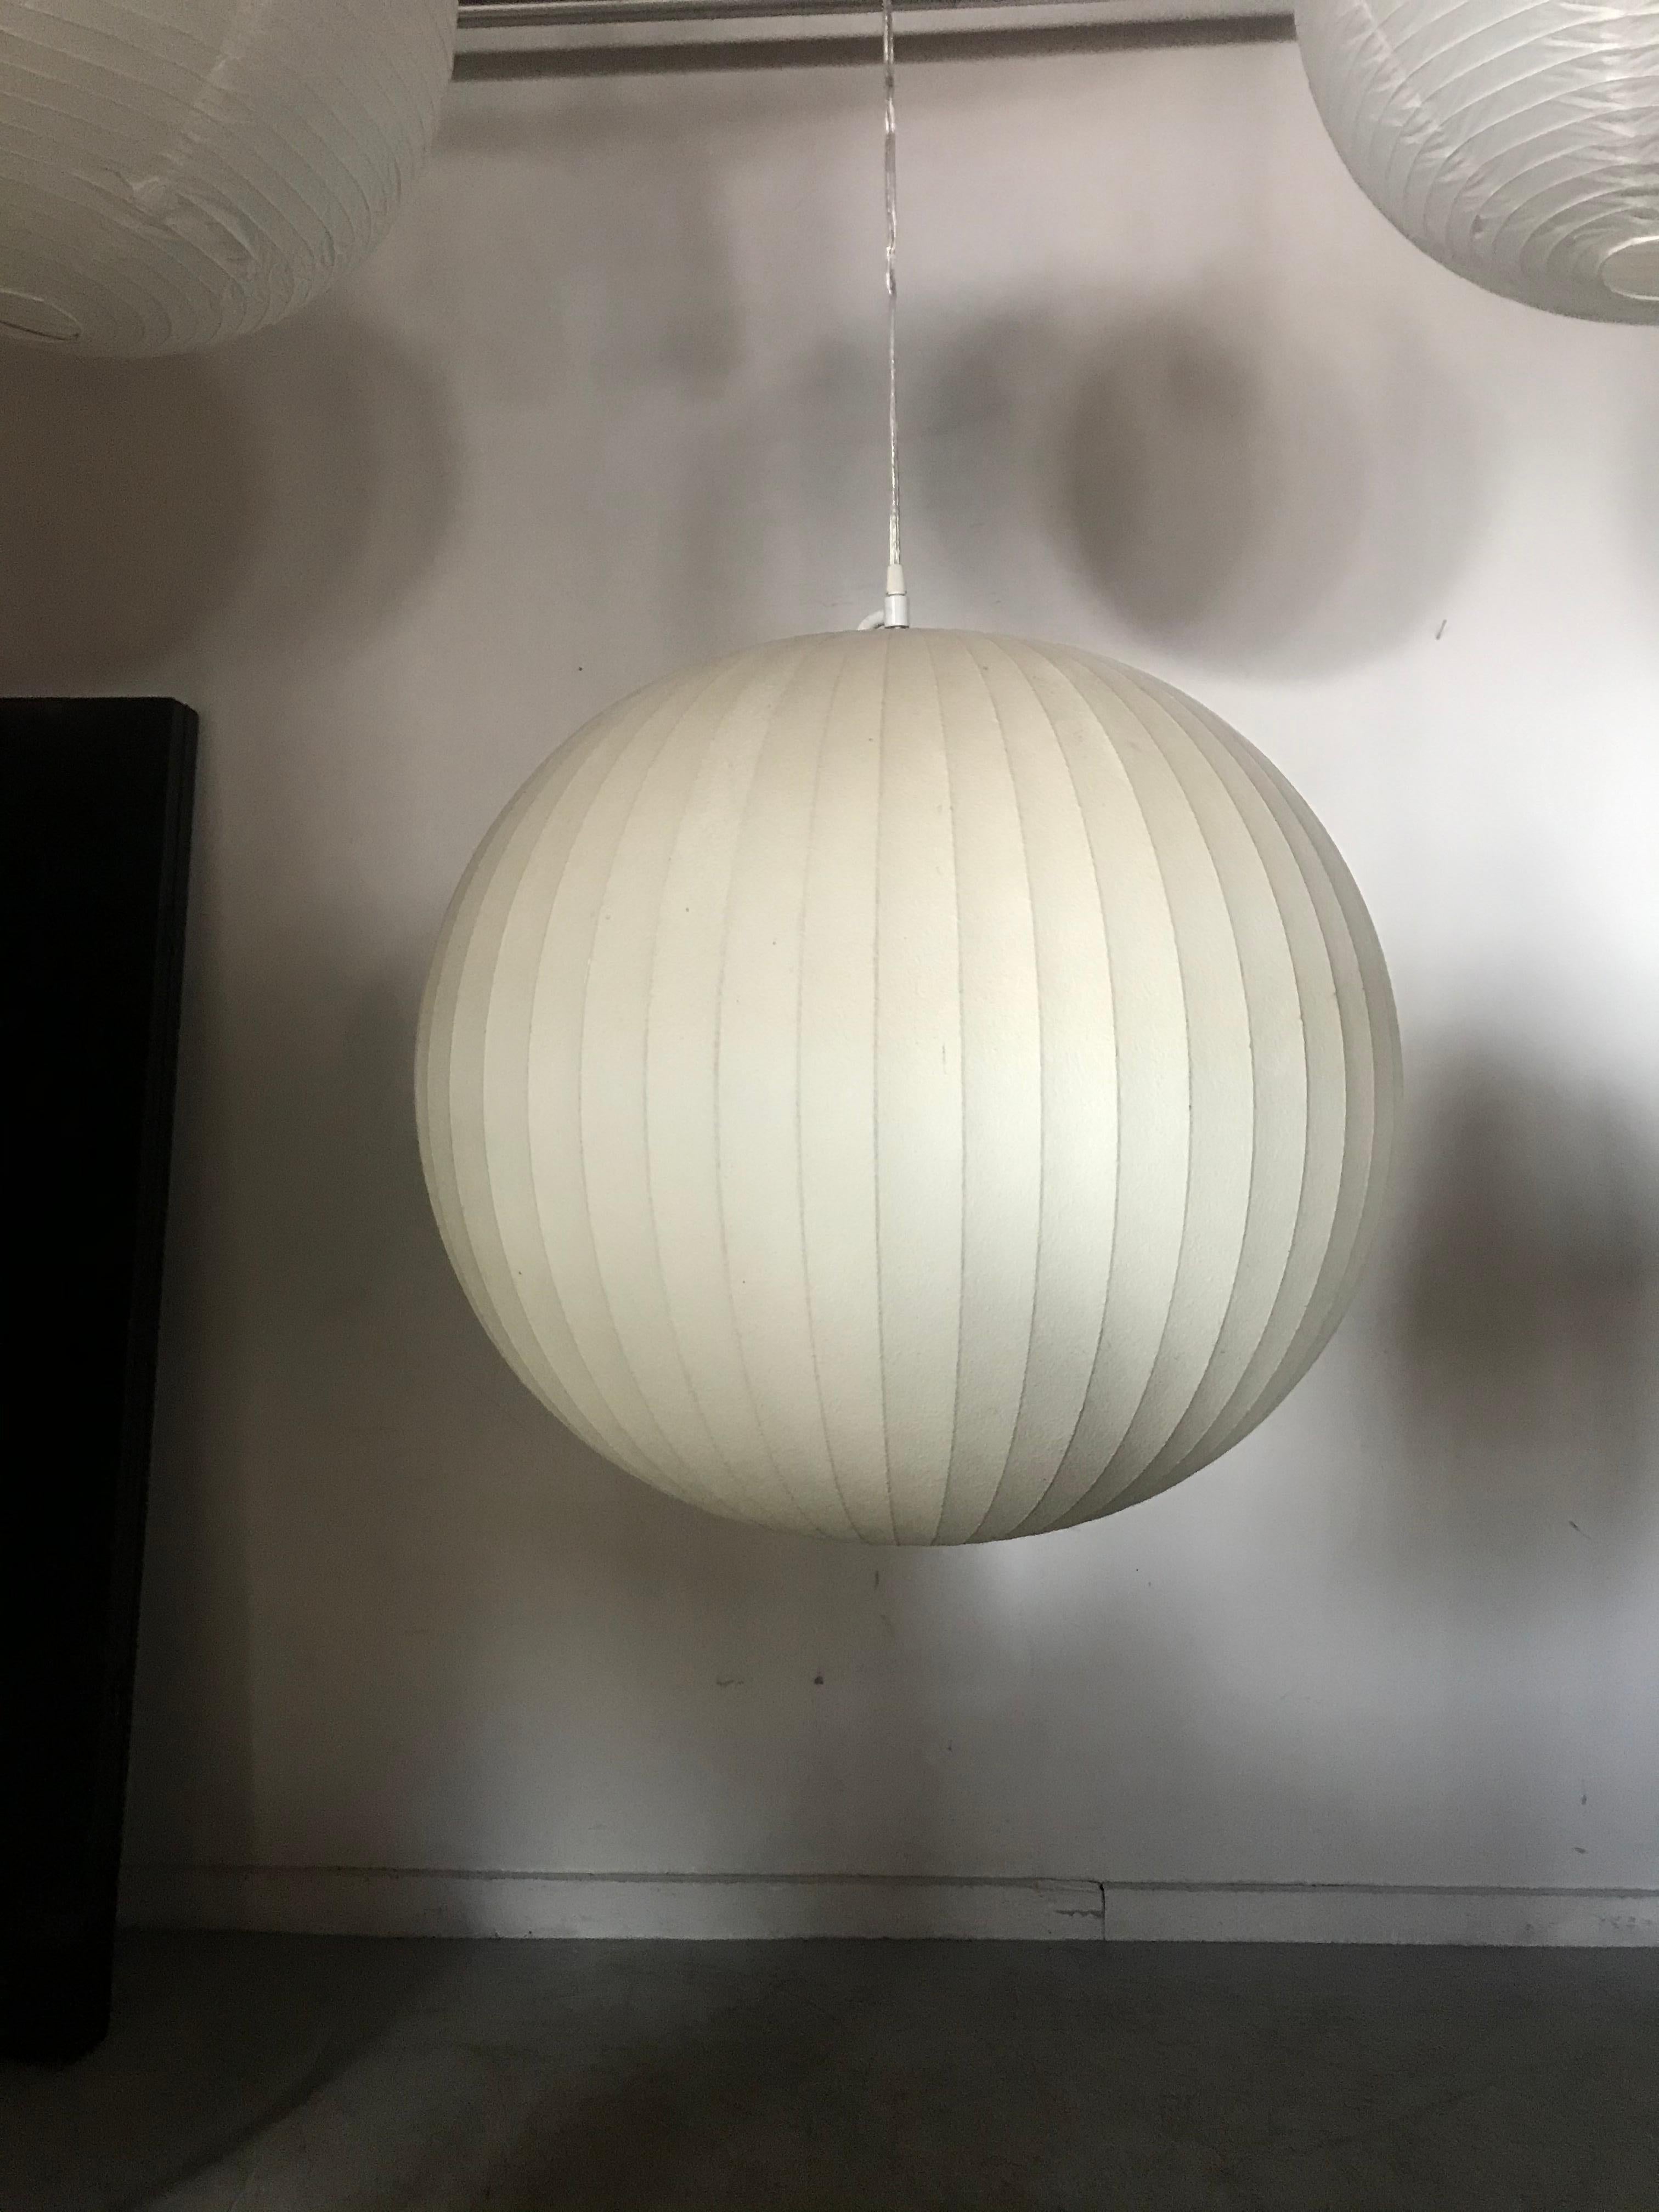 Mid-20th Century Rare George Nelson Large Bubble Lamp, Original Howard Miller Label, Old, Vintage